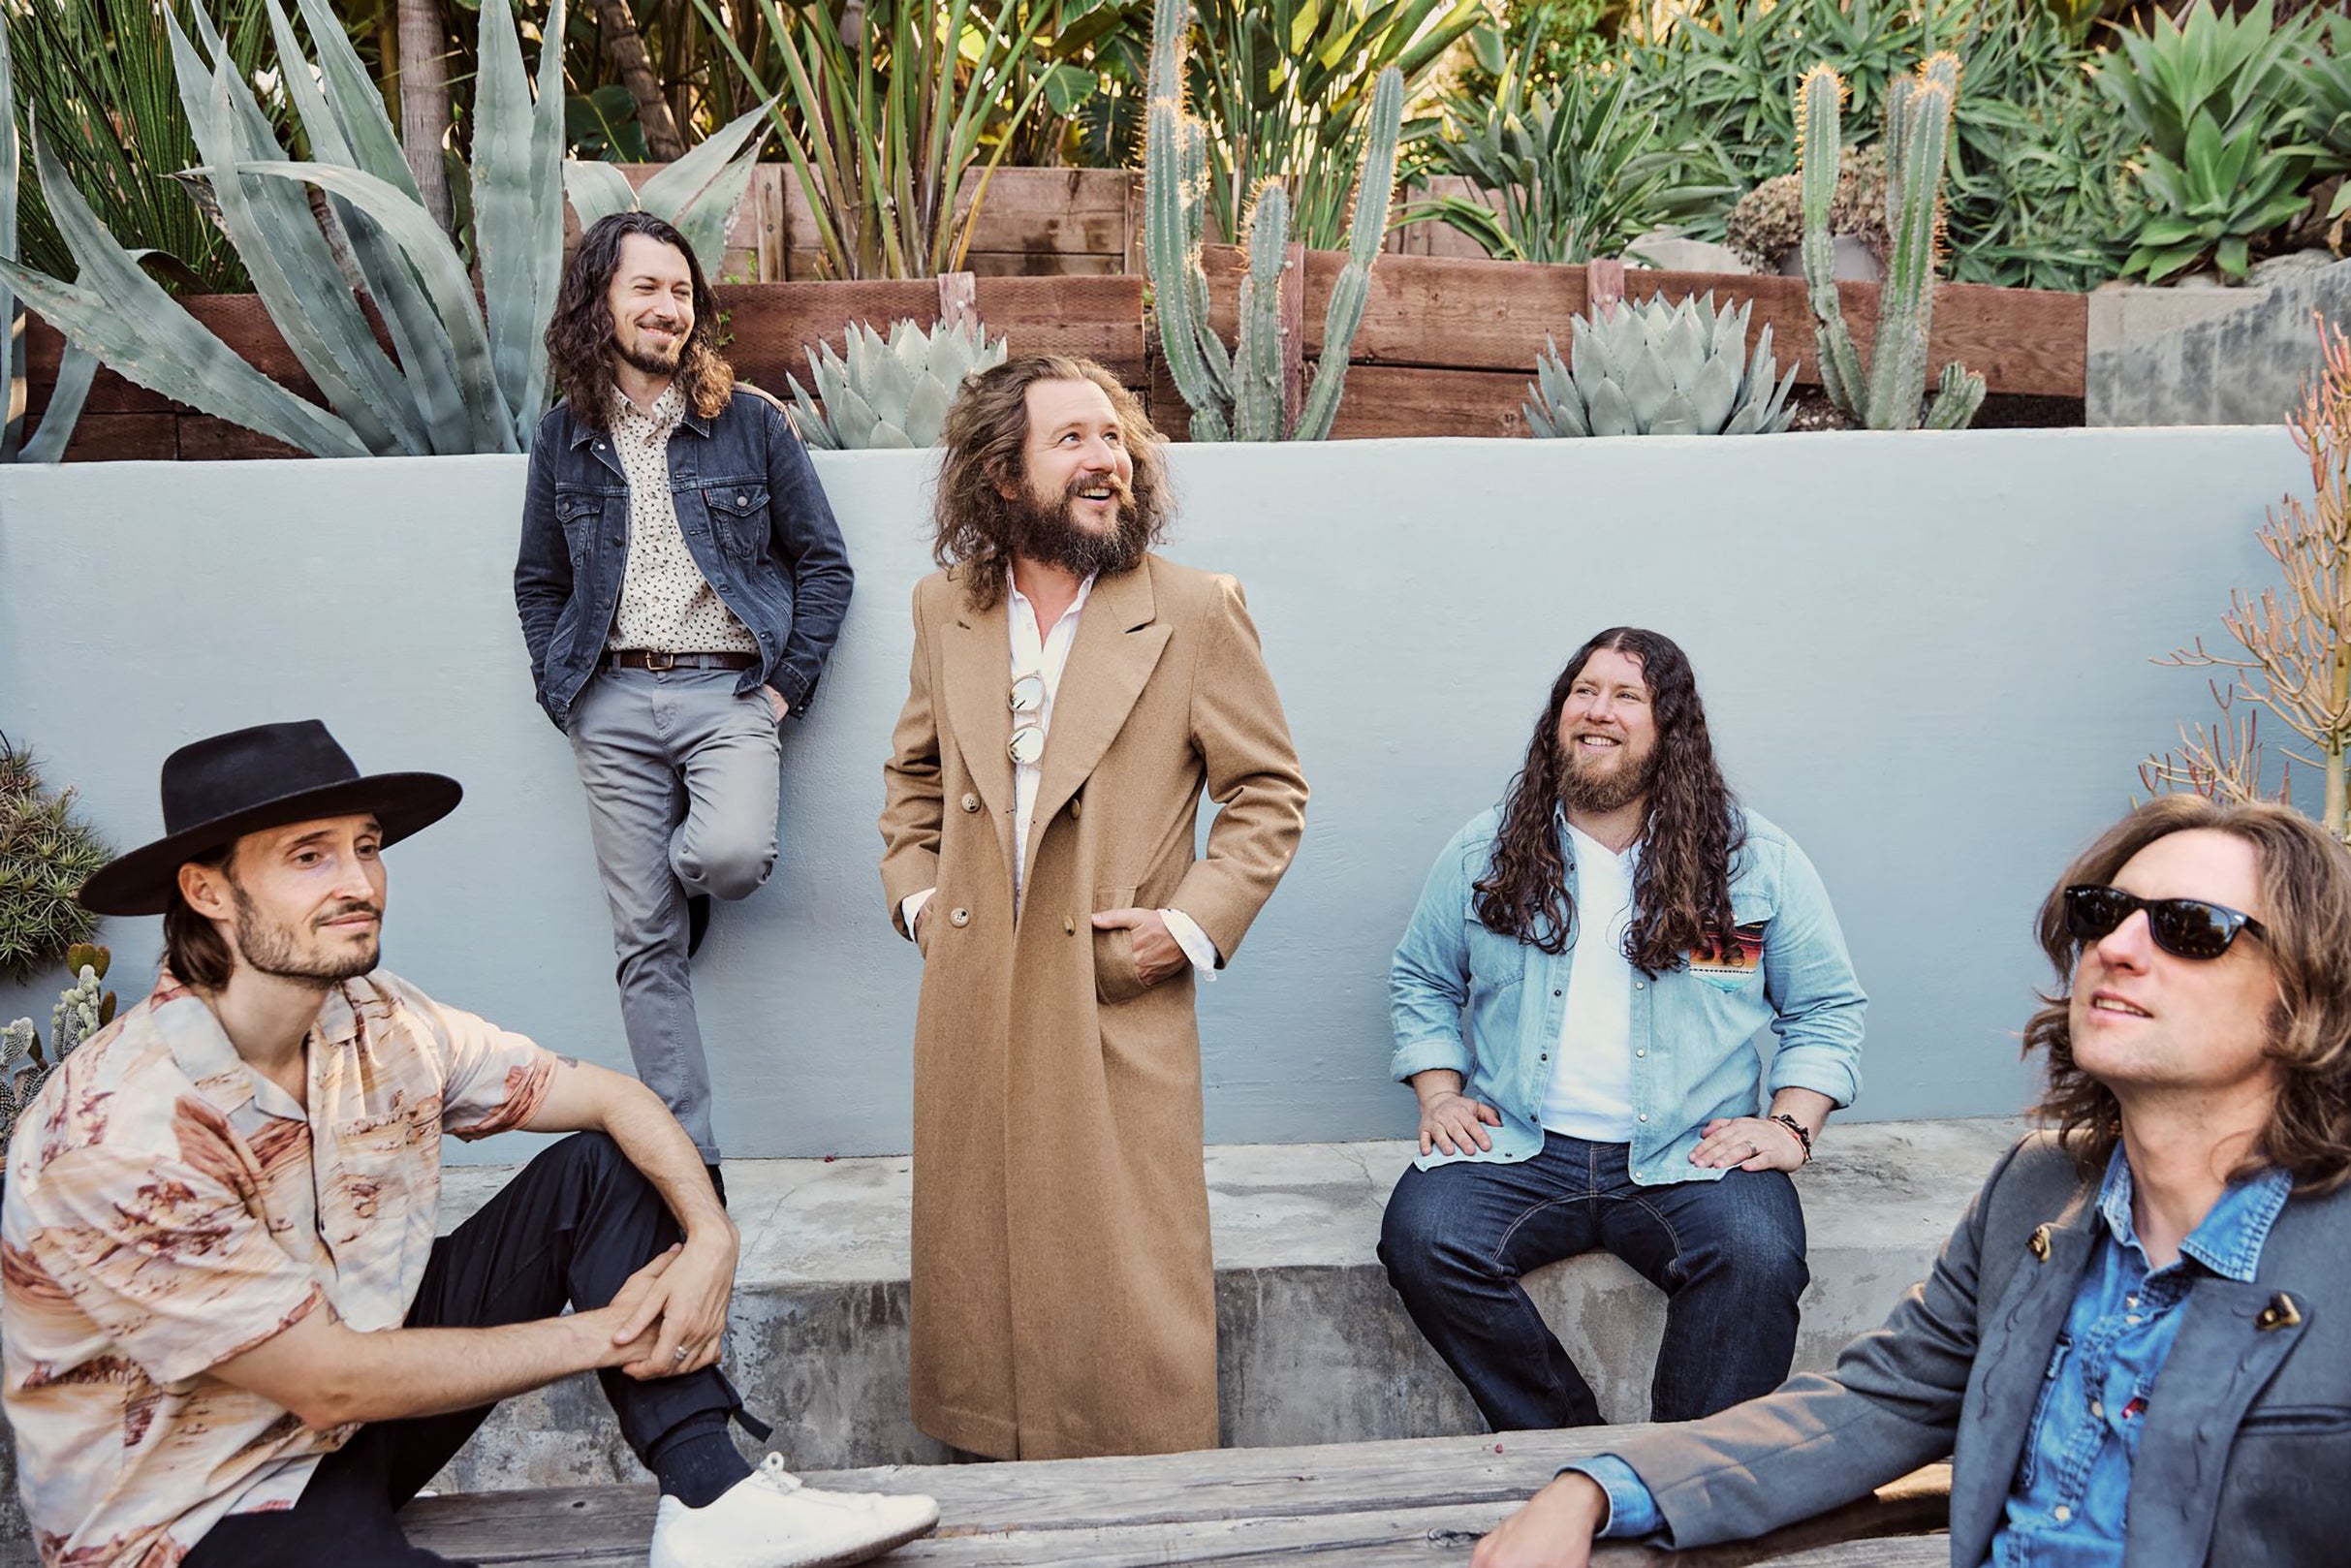 presale password to Eye To Eye Tour - My Morning Jacket and Nathaniel Rateliff & TNS affordable tickets in Philadelphia at TD Pavilion at the Mann